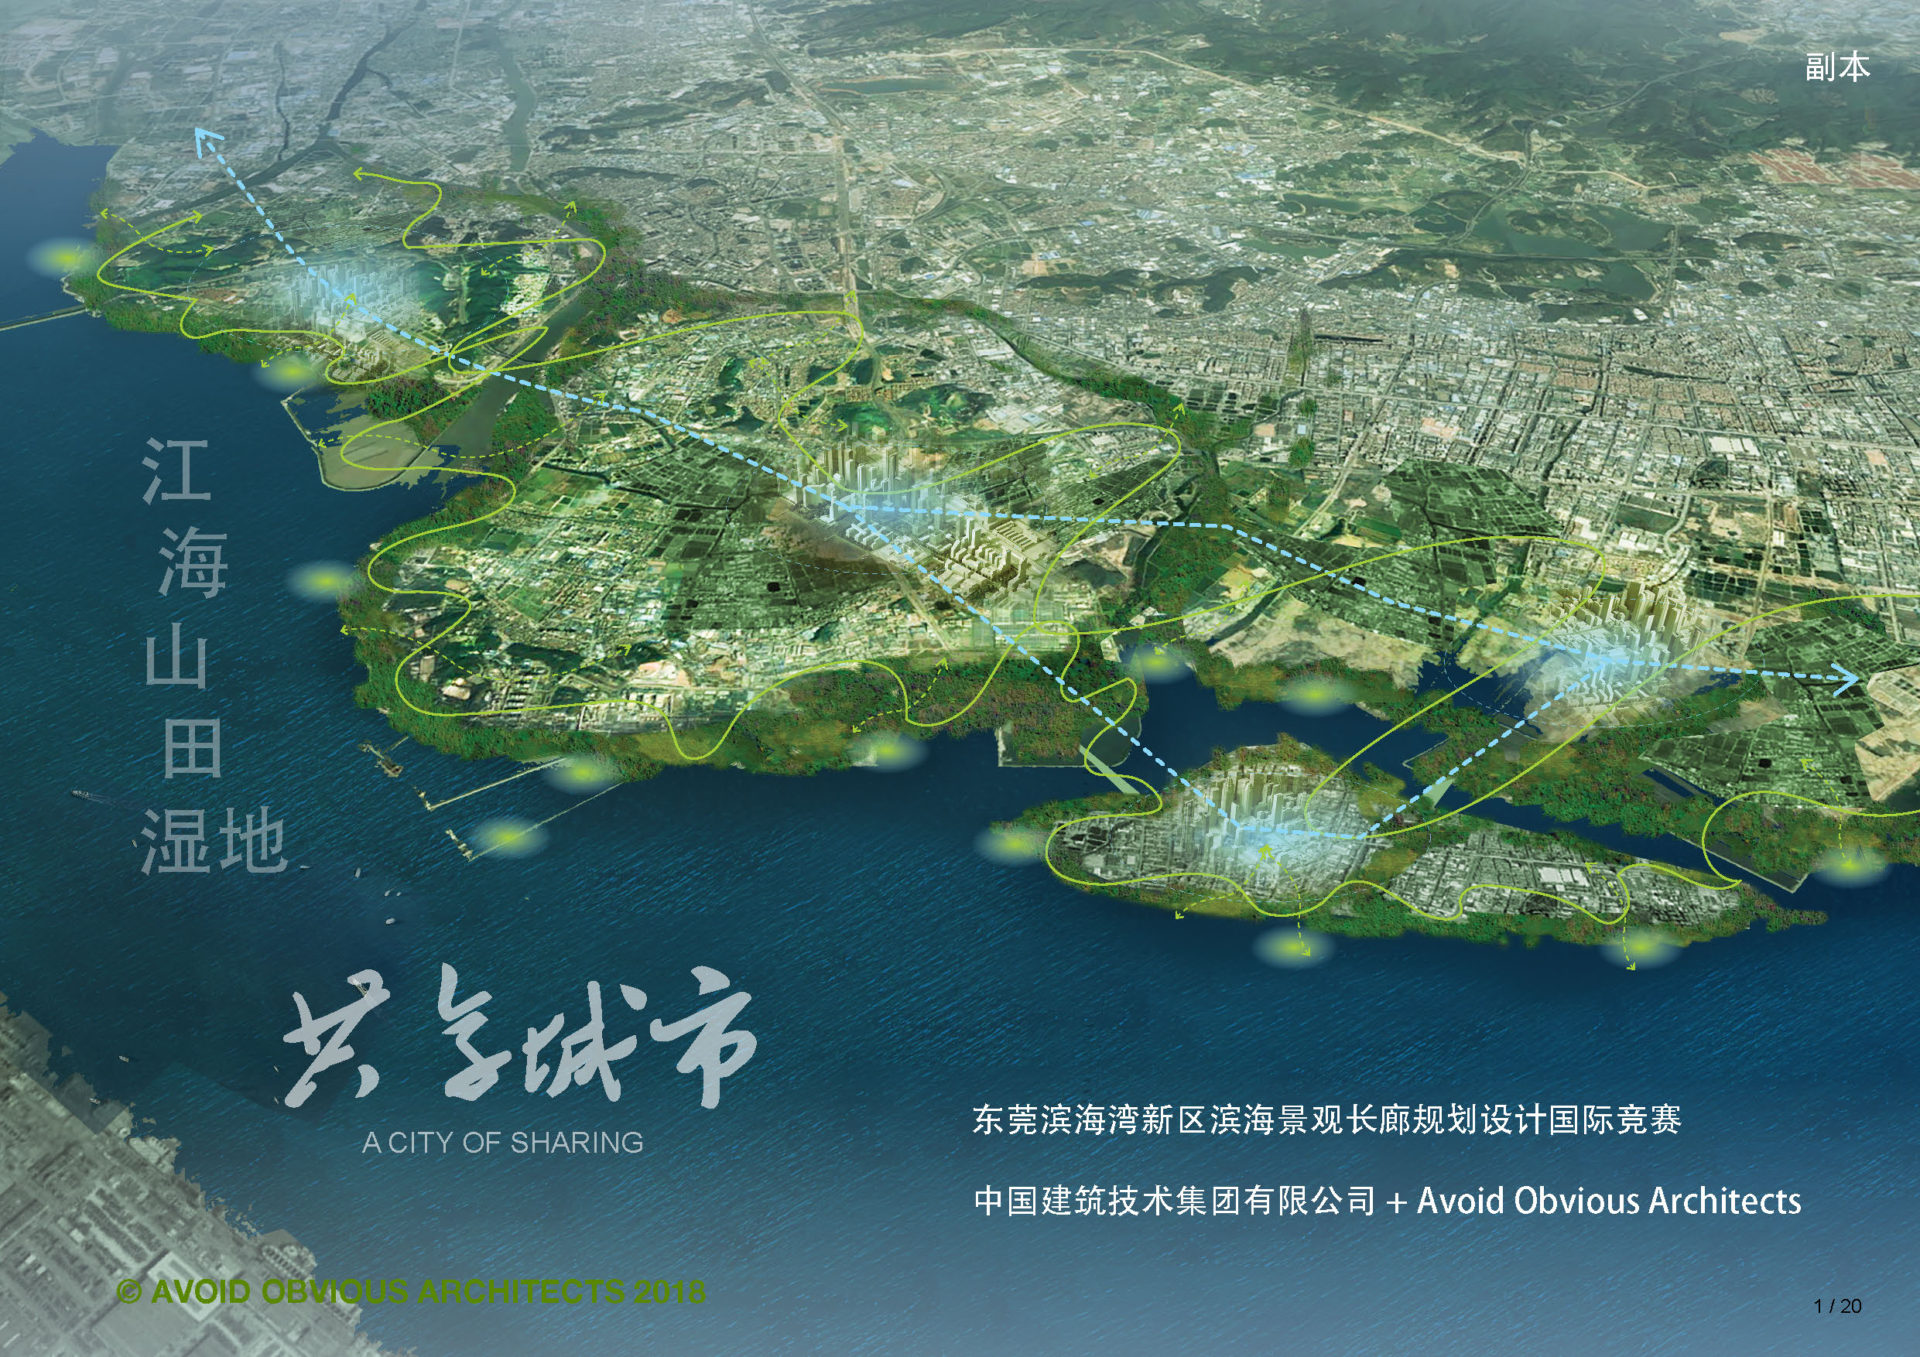 dongguan, city, coastal, design, water, green, architecture, avoid obvious, architects, vicky chan, masterplan, awards, sustainable, people, sharing, friendly, history, context, old, new, greater bay area, shenzhen, hong kong, pearl river delta, china, future